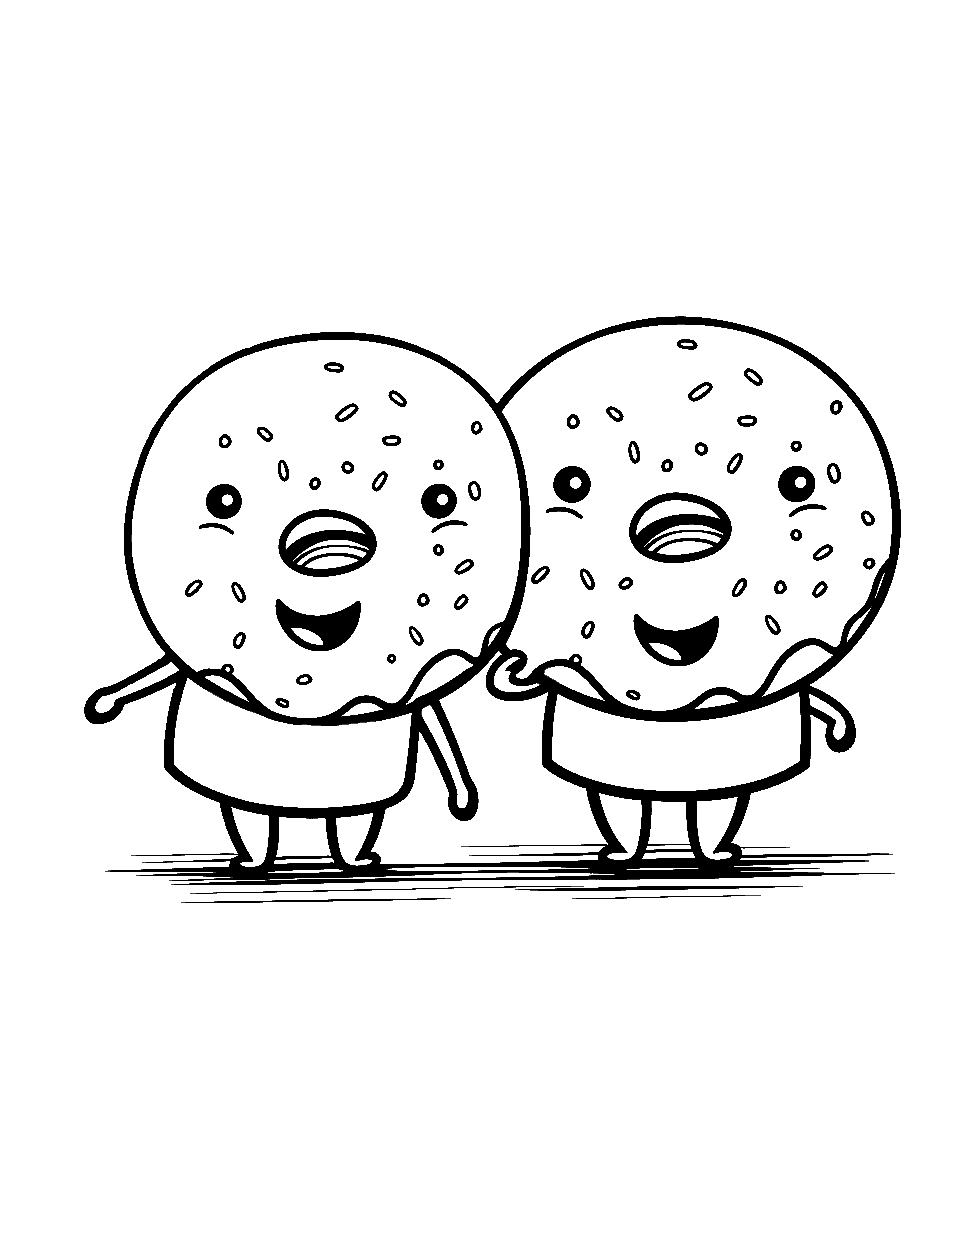 The Donut Duo Coloring Page - Two donuts both, having giggly expressions.